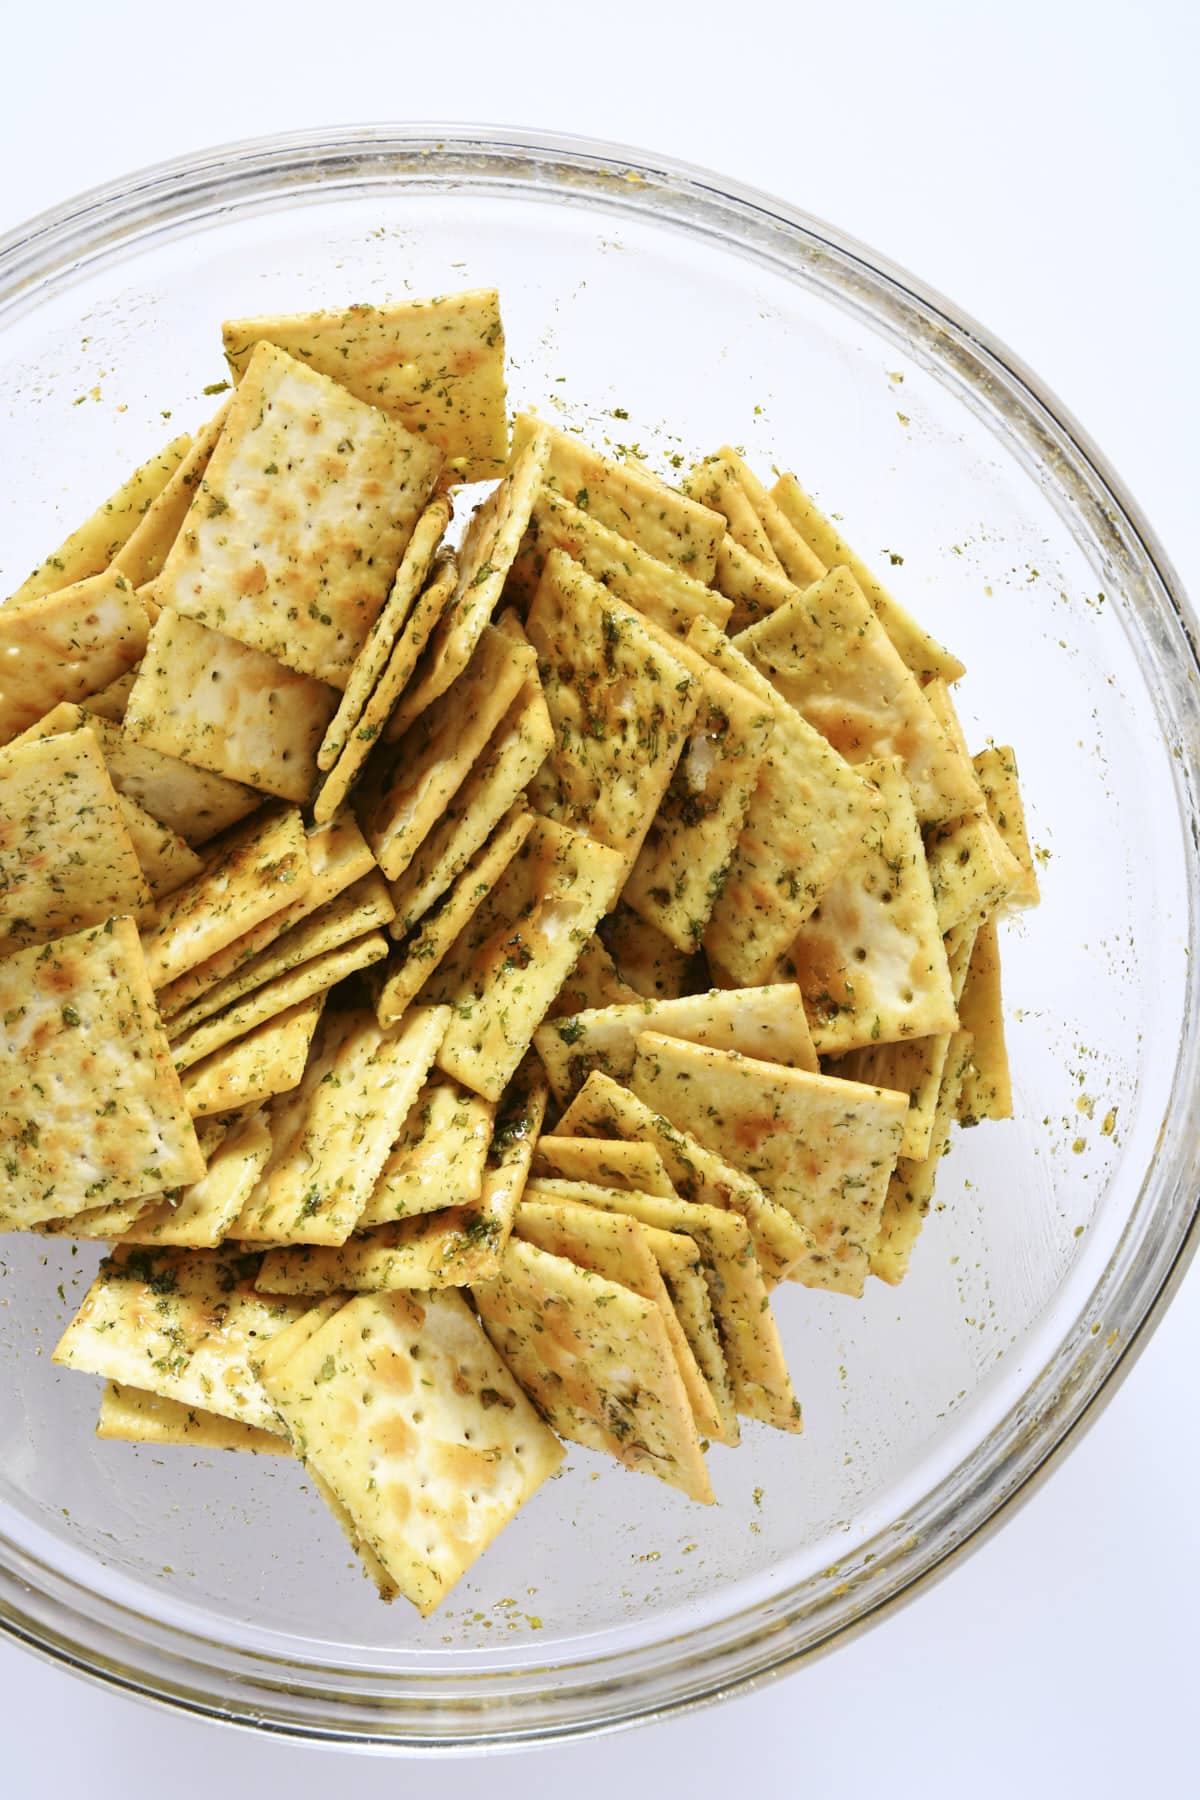 Saltine crackers coated with a spicy ranch marinade in a glass mixing bowl